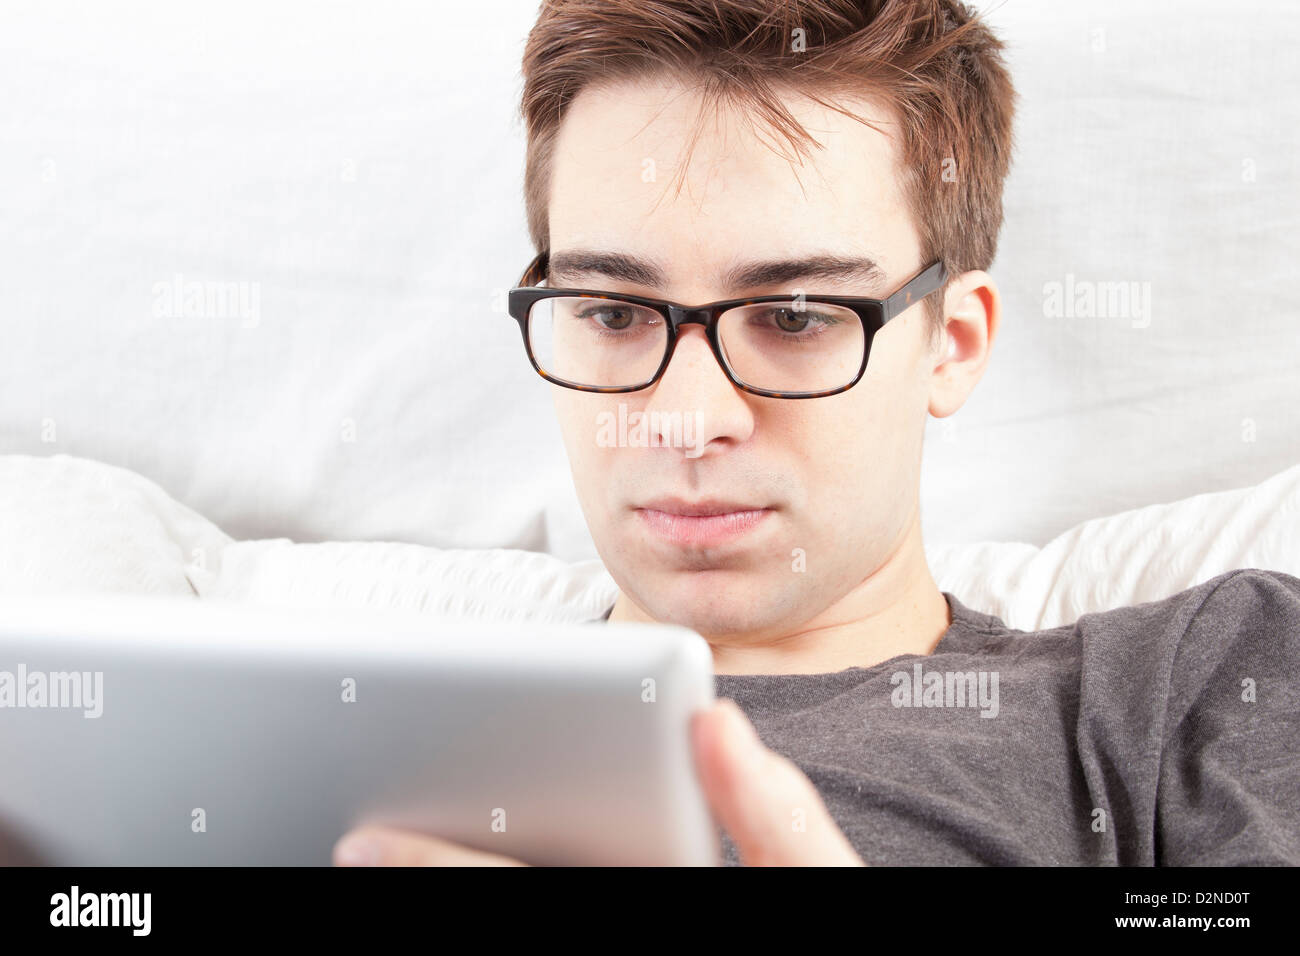 25 30 Year Old Male With Glasses High Resolution Stock Photography and  Images - Alamy